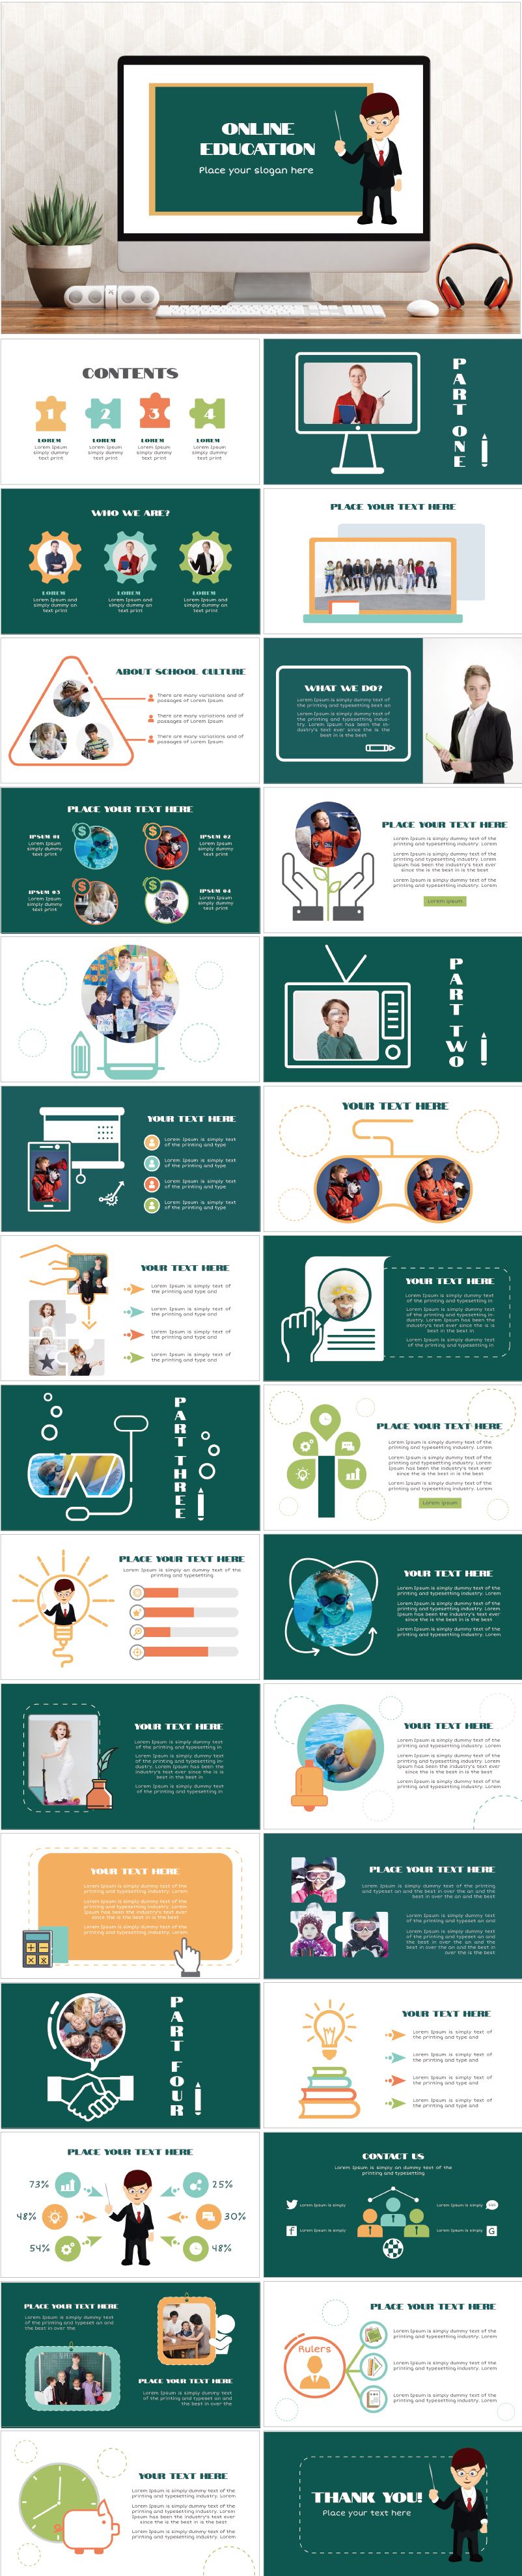 PowerPoint template vol.29